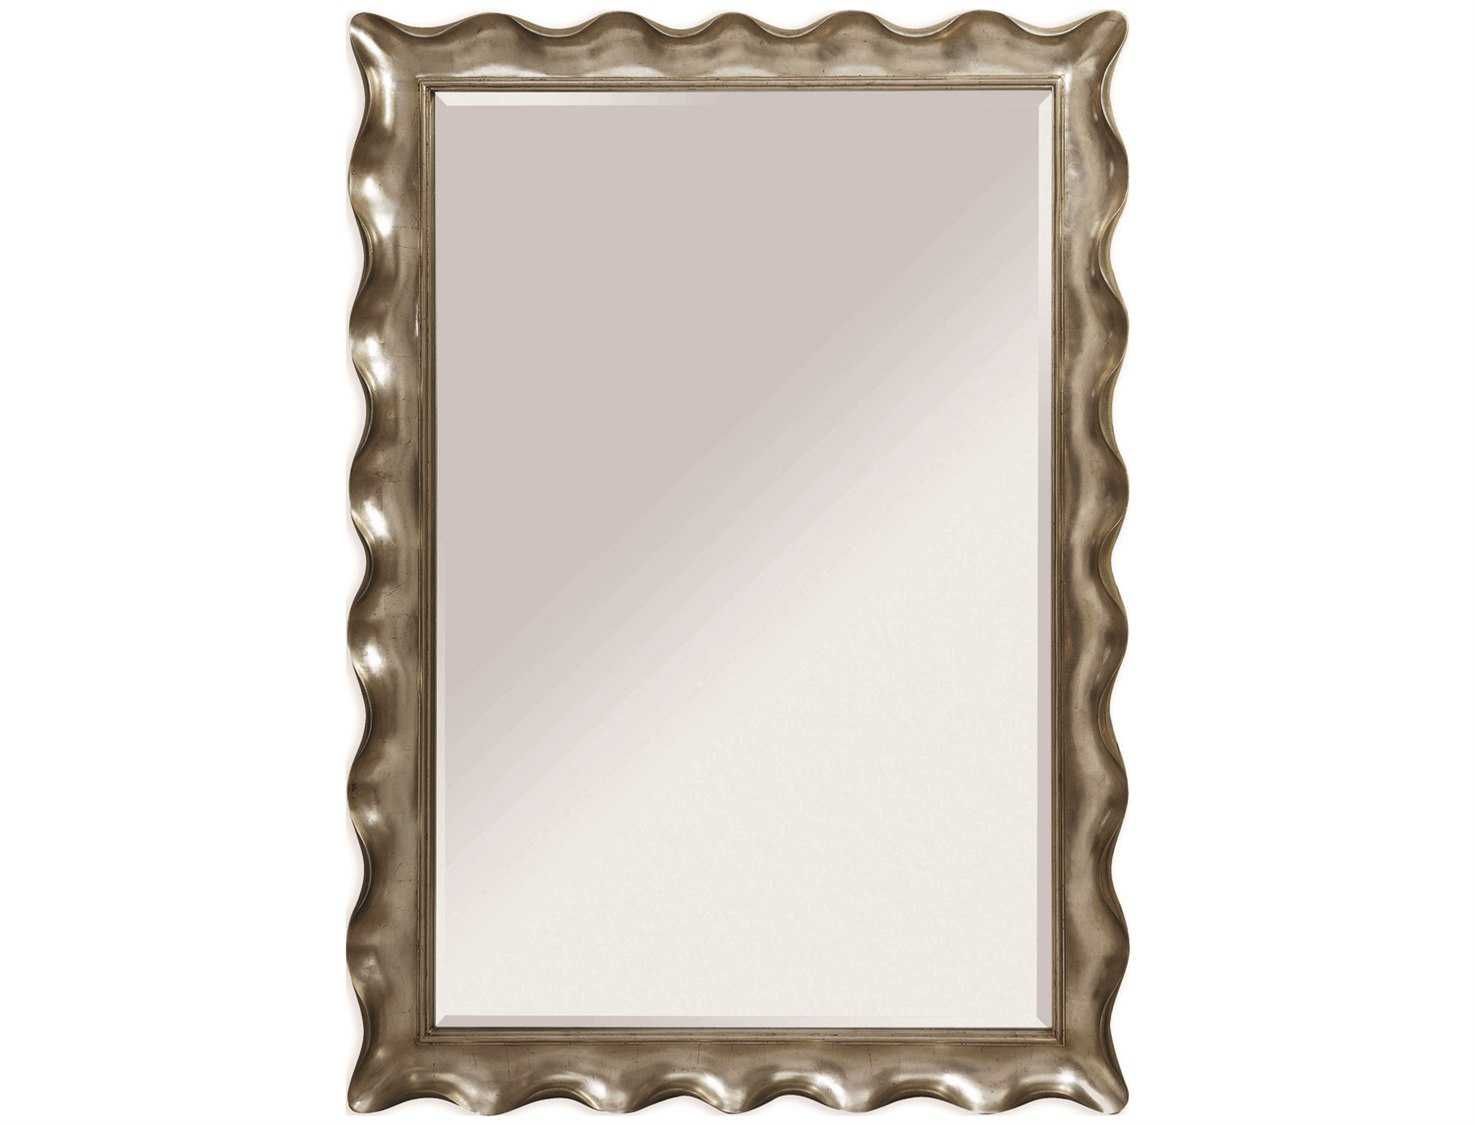 Bassett Mirror Hollywood Glam 59 X 83 Silver Leaf Pie Crust Leaner With Regard To Glam Silver Leaf Beaded Wall Mirrors (View 9 of 15)